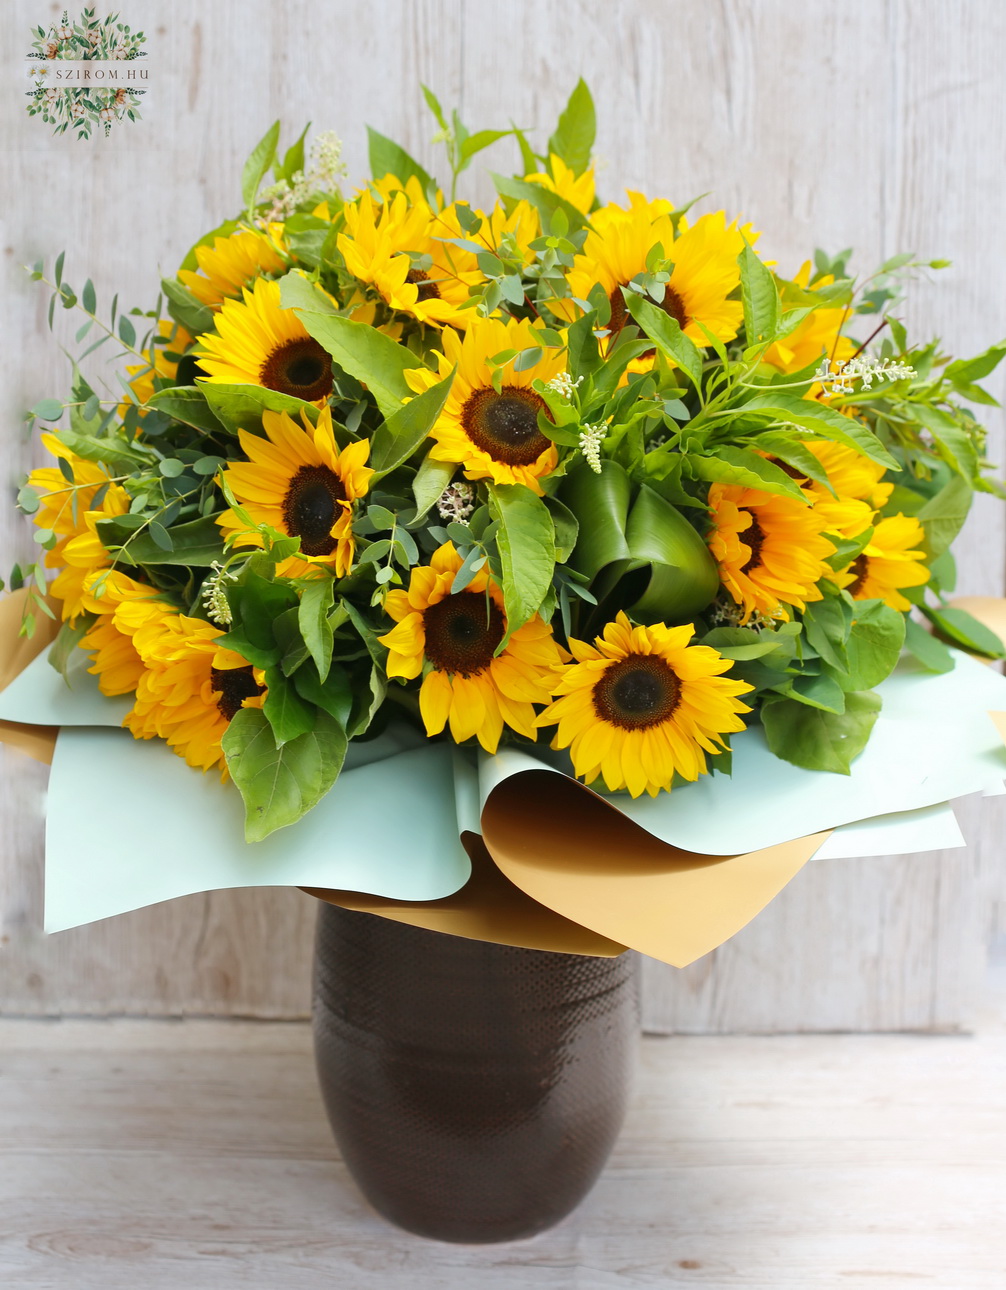 flower delivery Budapest - 30 sunflowers in a large bouquet with lots of greenery, ceramic vase